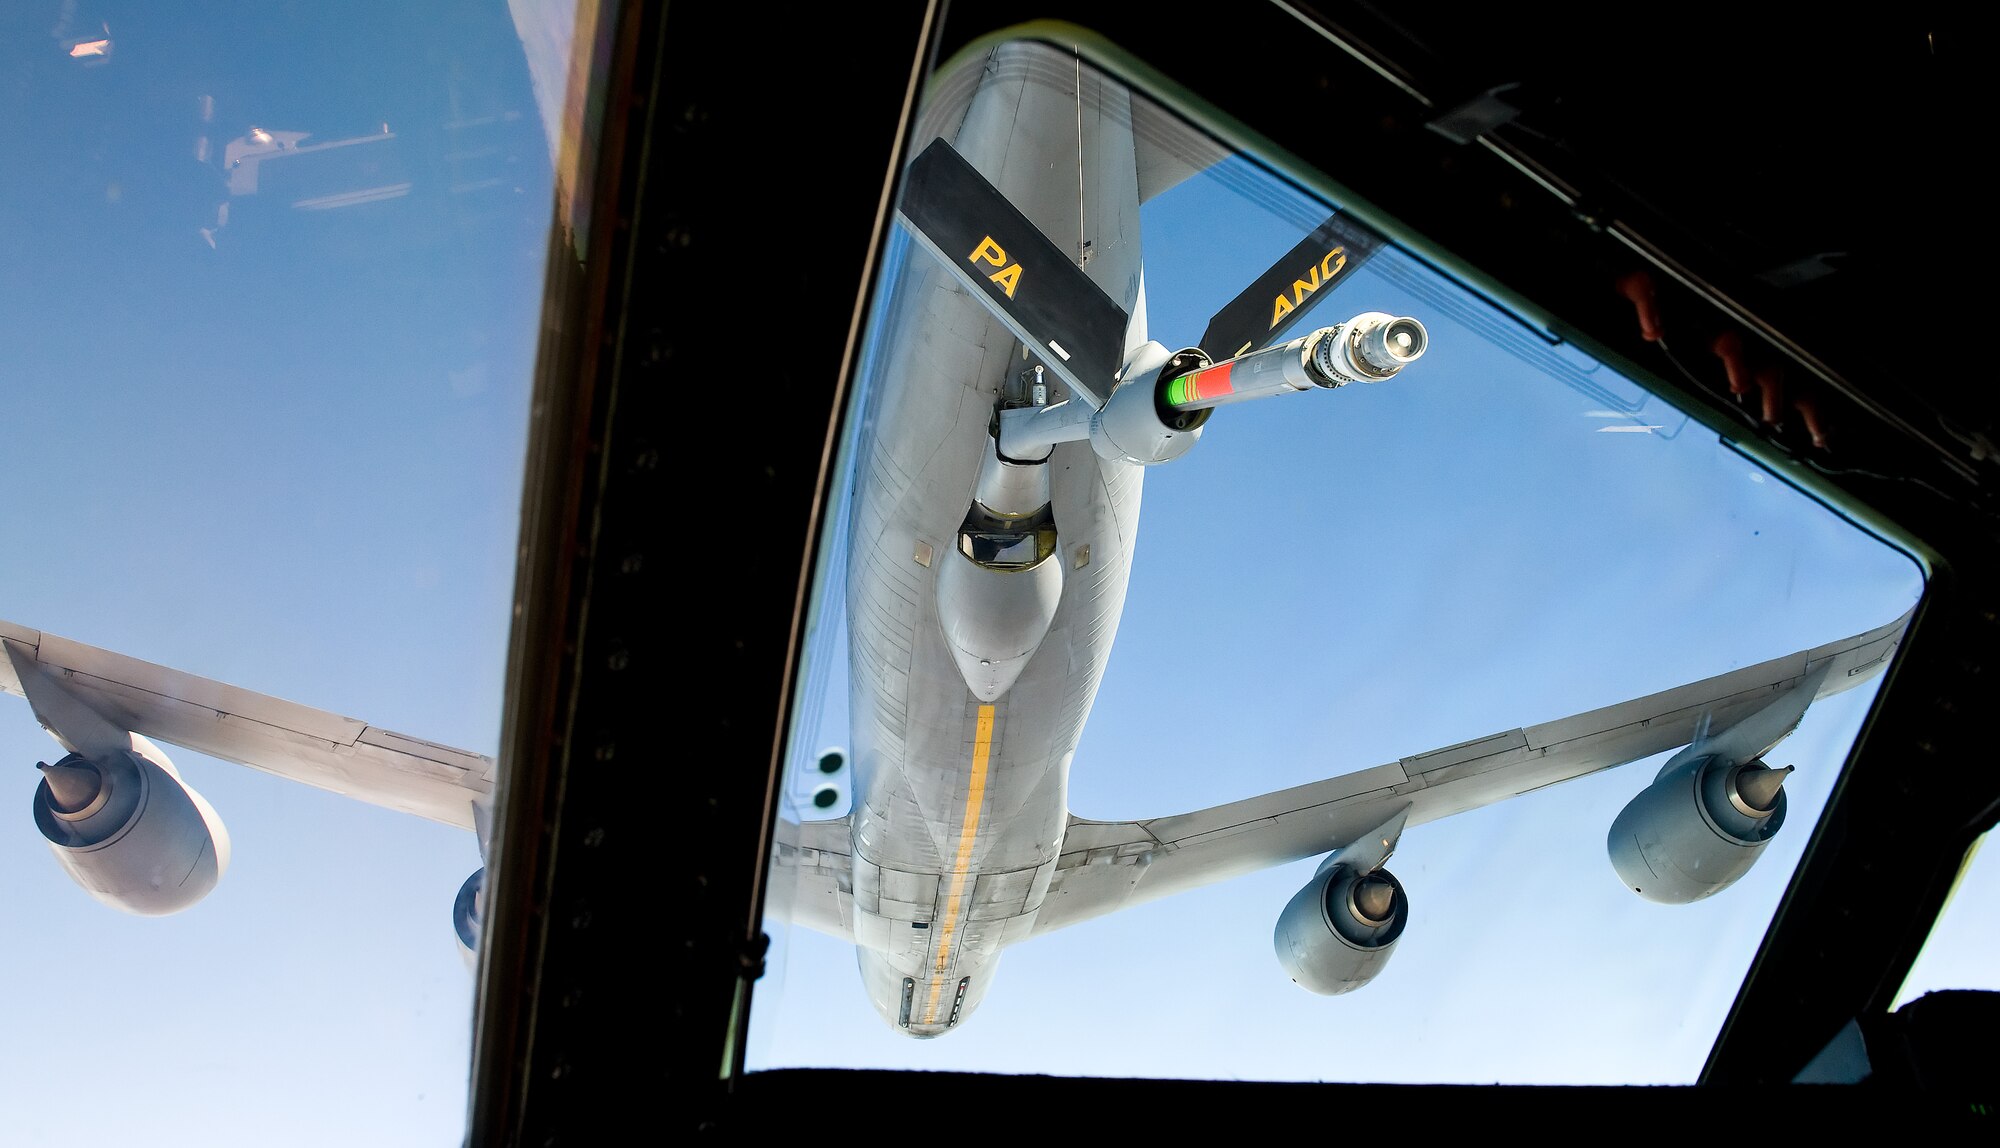 A pilot's view from the windshield of a C-5M Super Galaxy as it slowly approaches into position behind a Pennsylvania Air National Guard KC-135T Stratotanker from the 171st Air Refueling Wing, Pittsburgh International Airport, Pa. during an air refueling flight Oct. 29, 2014. An aircrew from the 9th Airlift Squadron, Dover Air Force Base, Del., took 17 Team Dover honorary commanders, unit commanders and public affairs ambassadors on a 2.7 hour flight demonstrating the air refueling capabilities of U.S. Air Force aircraft. (U.S. Air Force photo/Roland Balik)